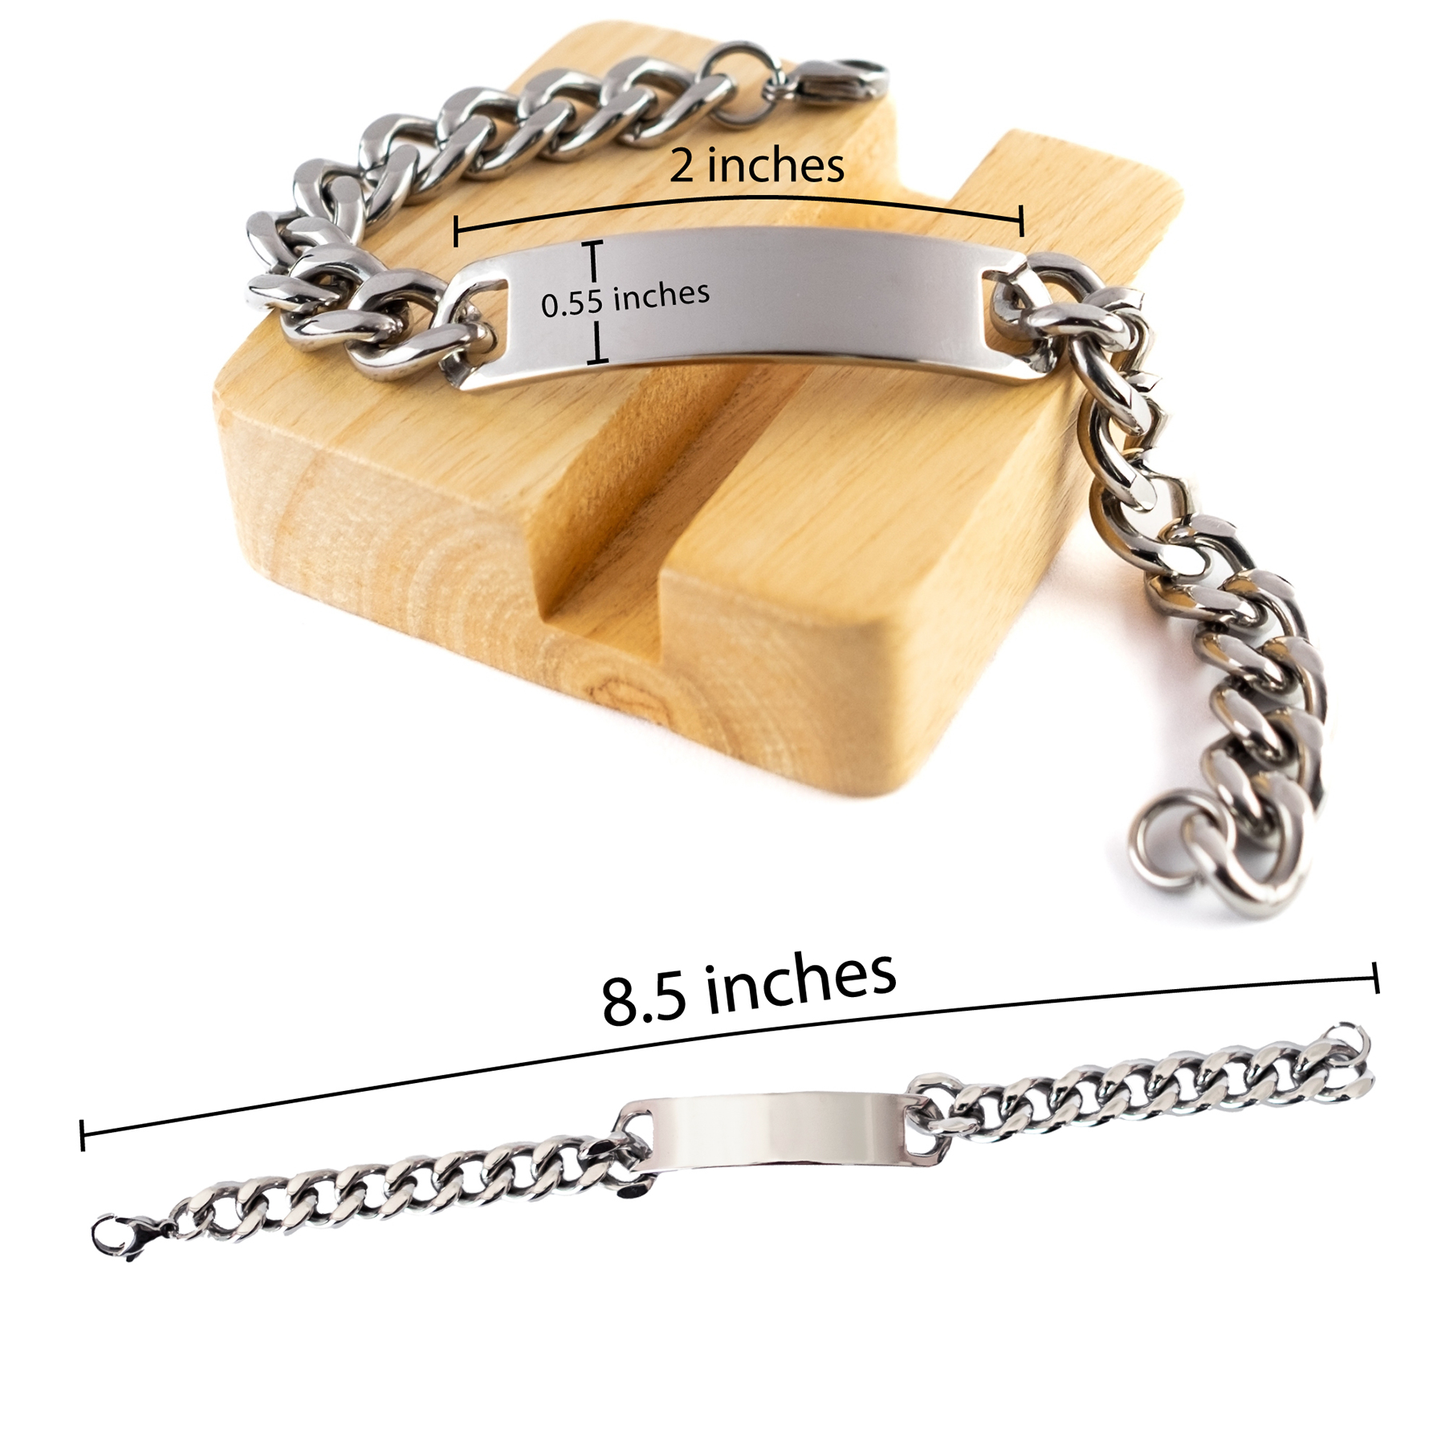 Cuban Chain Stainless Steel Bracelet for Stepbrother - You Will Always Have a Special Place in My Heart - Unique Gift for Birthday, Christmas, Graduation - Confidence and Hope Filled Bracelet for Stepbrother